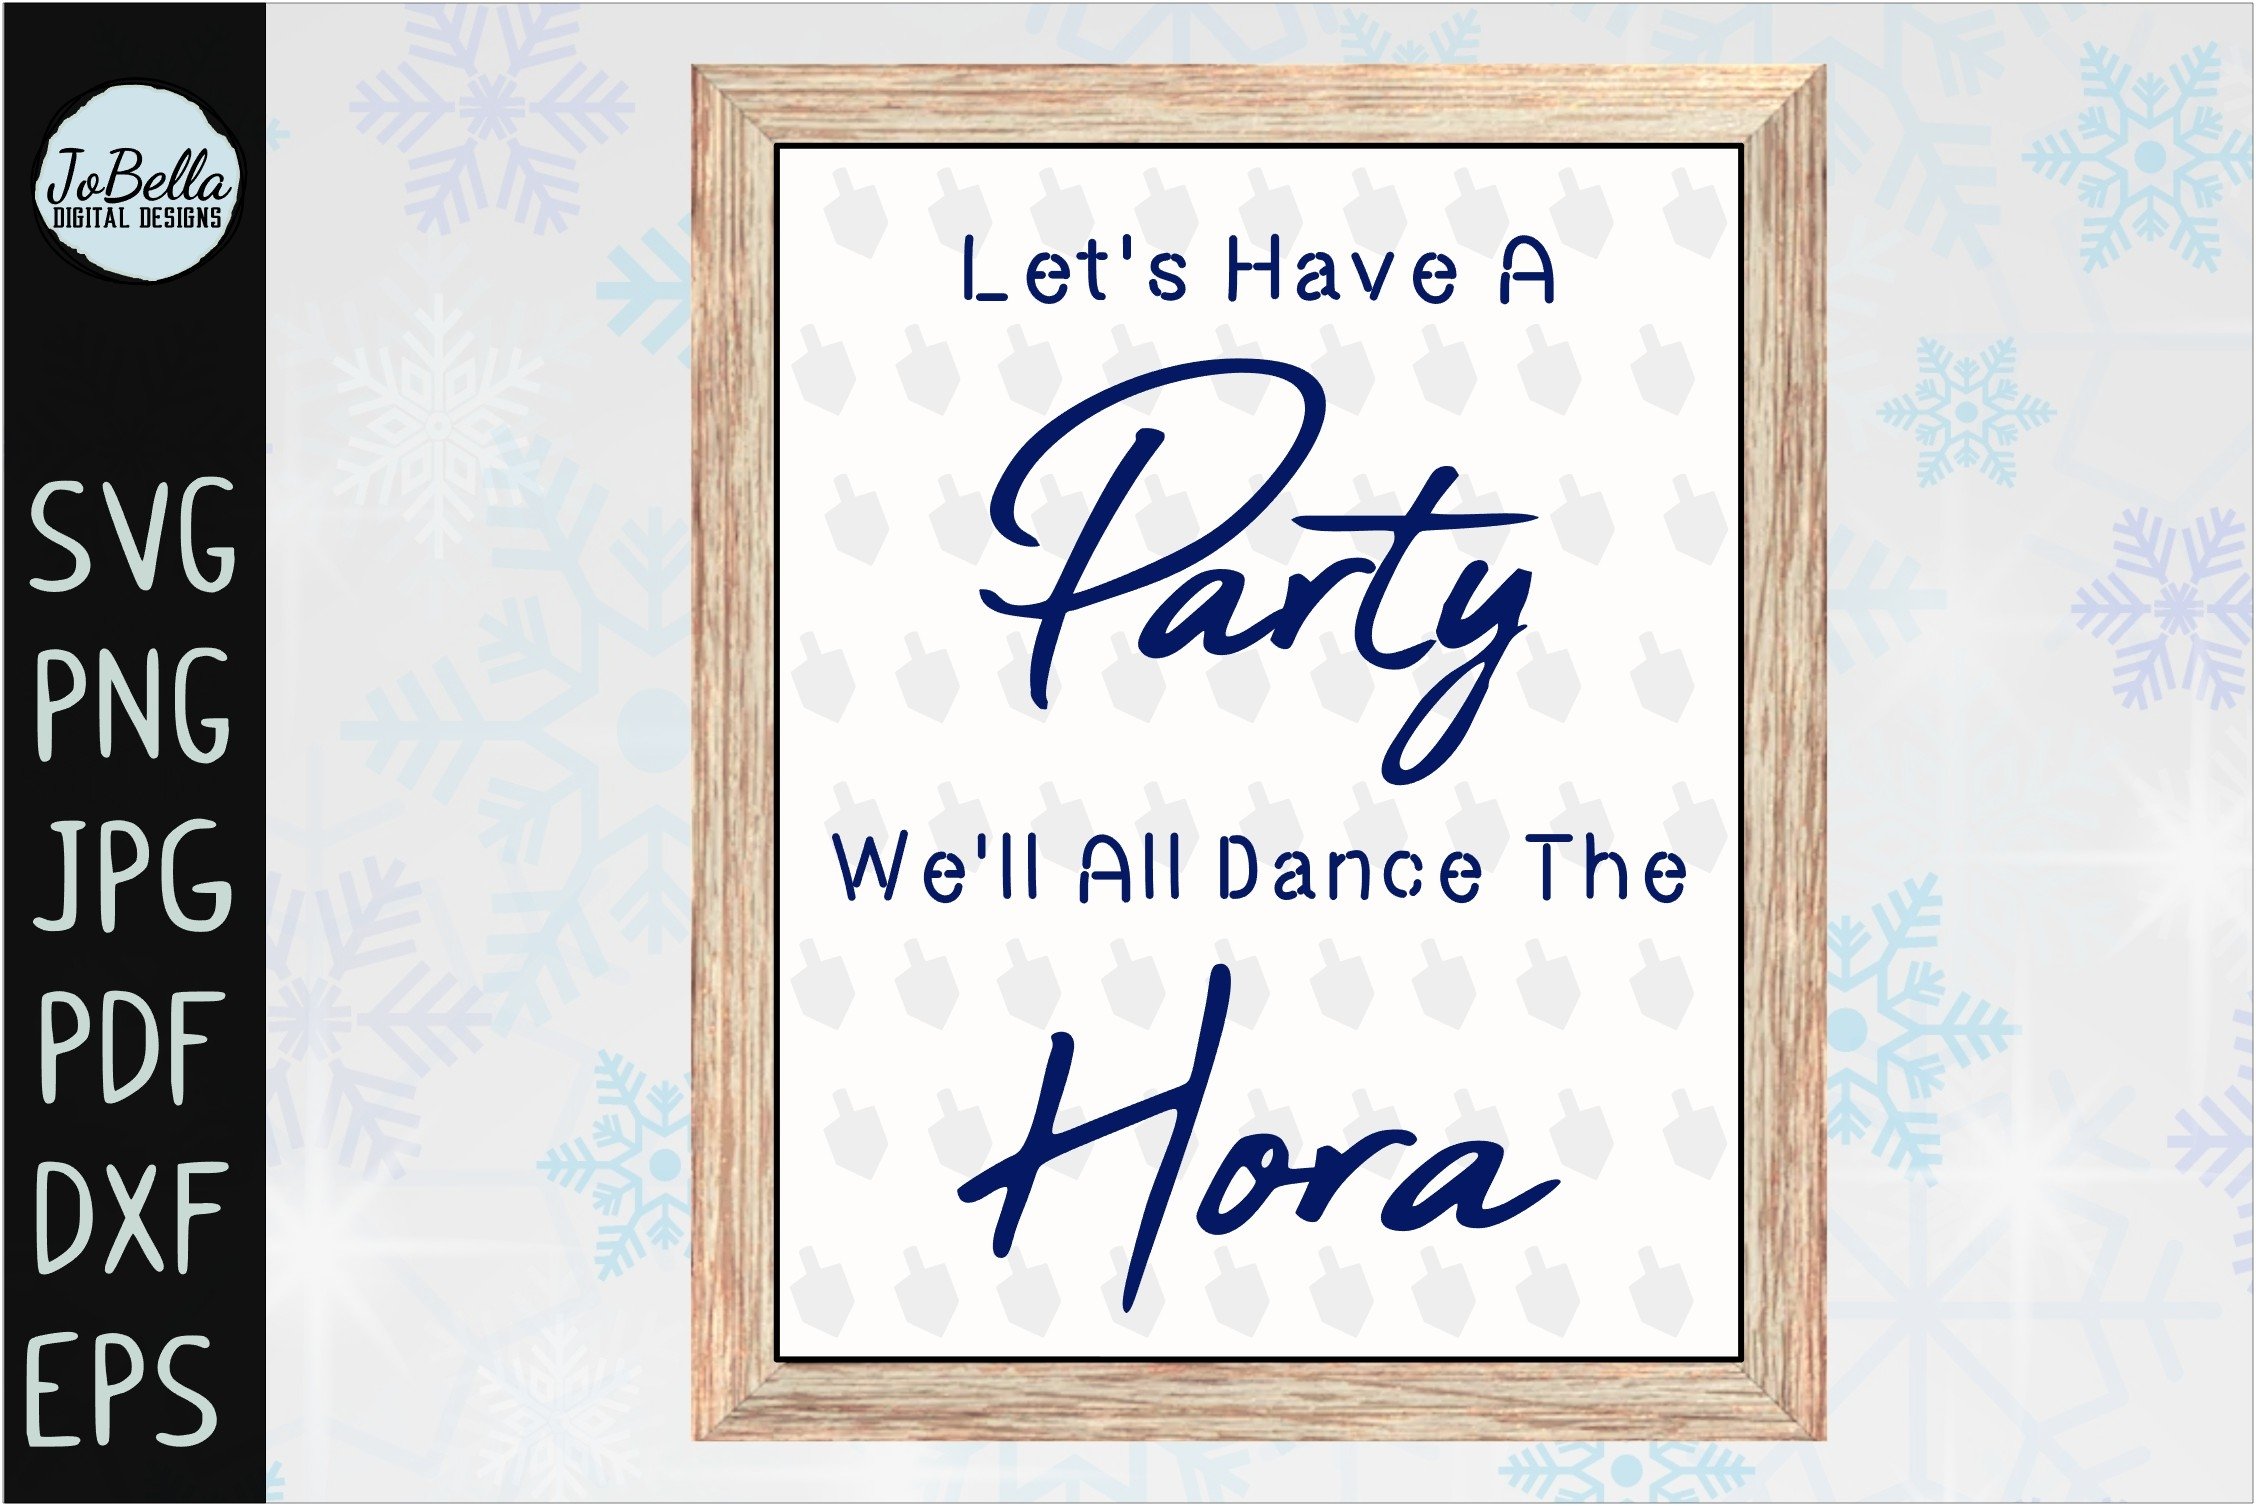 The lettering "Let's have a party we'll all dance the hora".